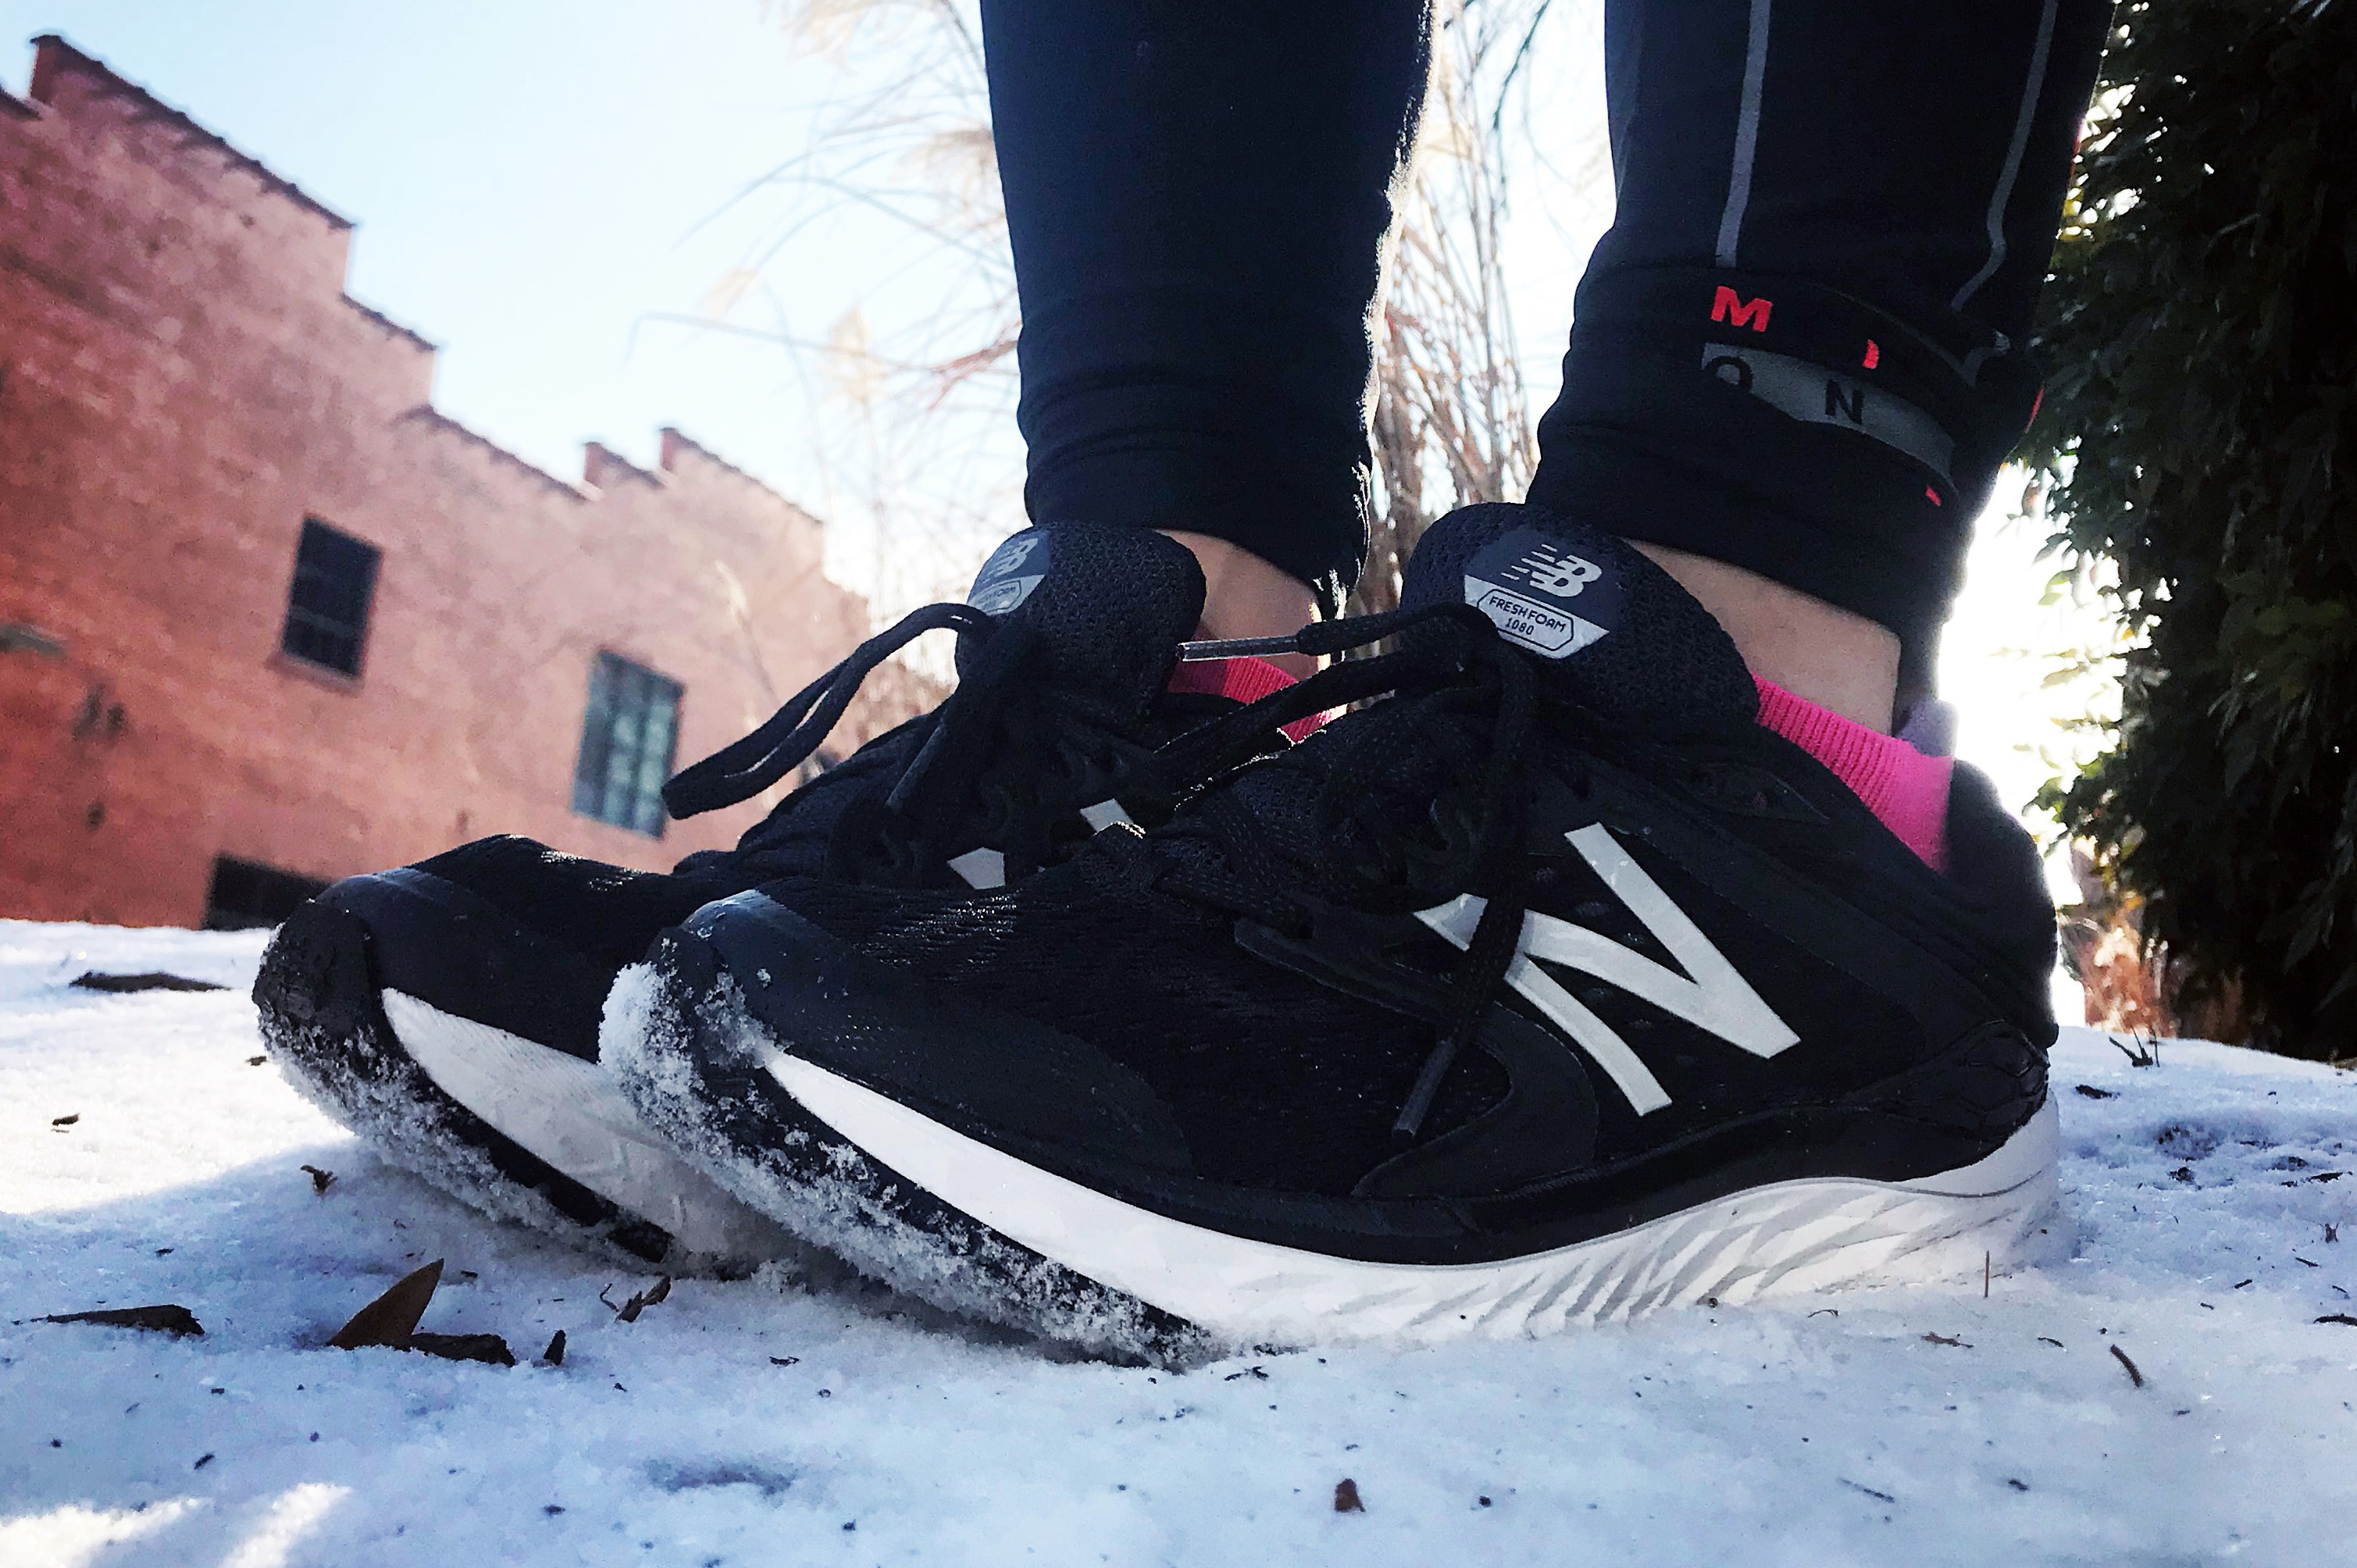 New Balance 1080 v8 Performance Review » Believe in the Run